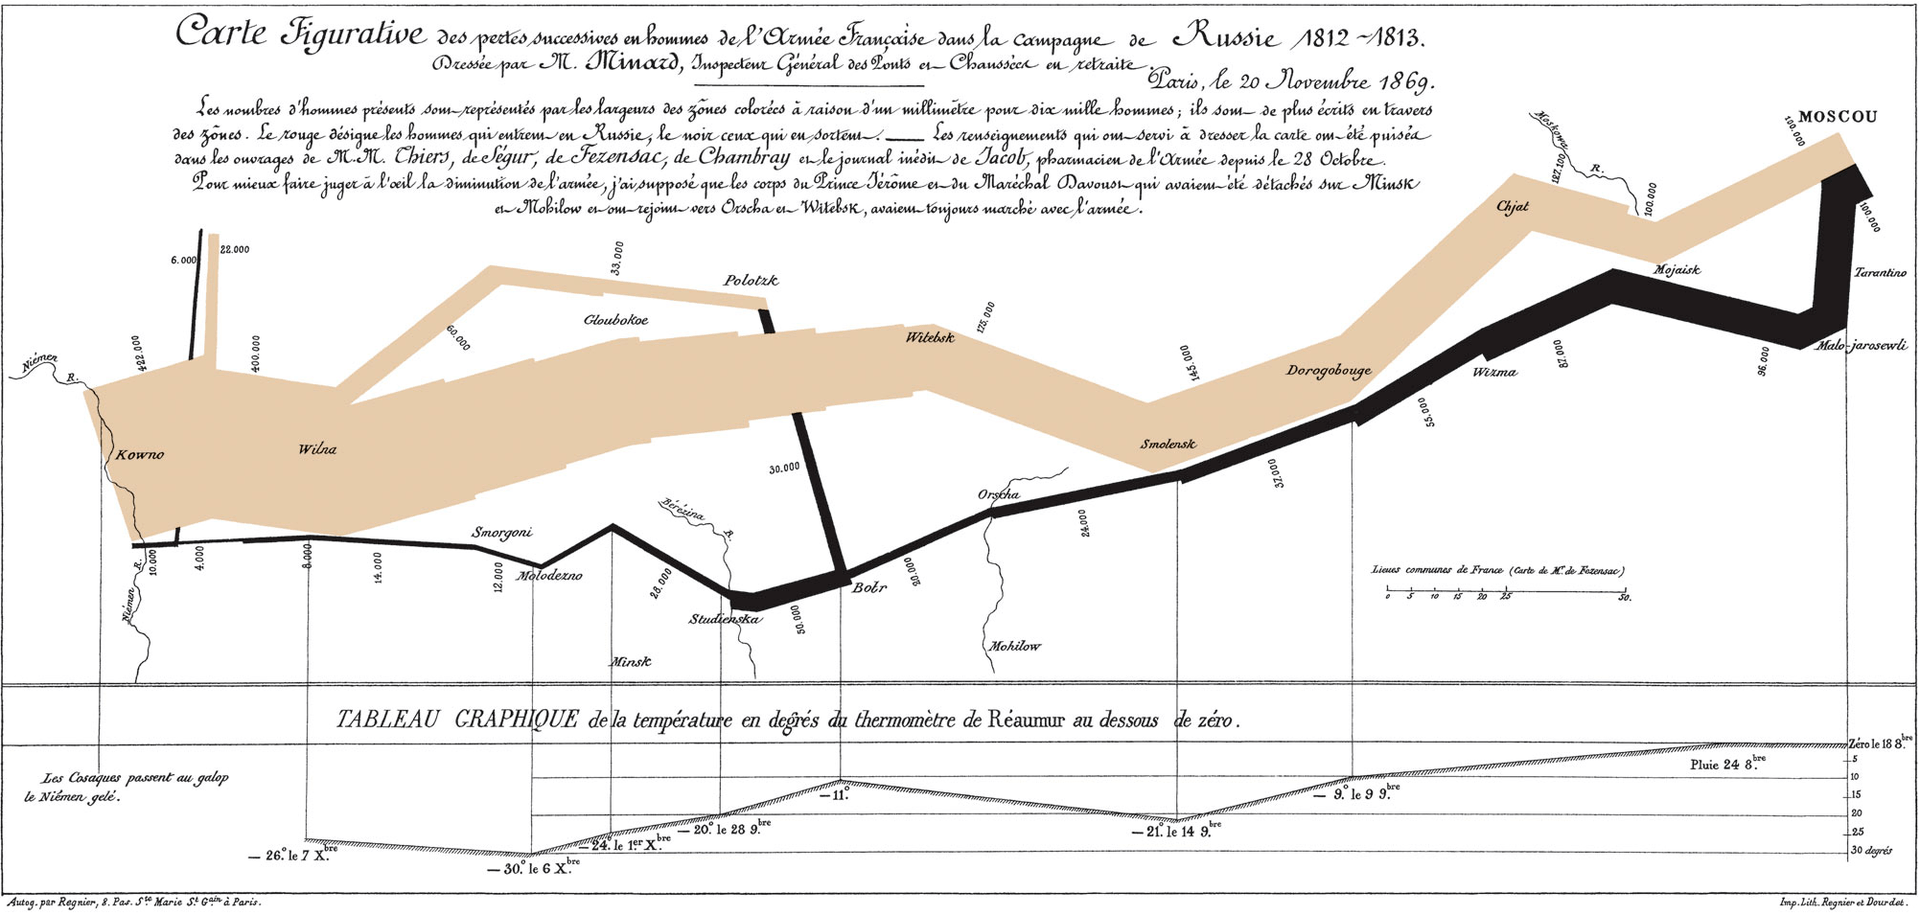 Antique visualization depicting Napoleon's march on Moscow in beige and black 